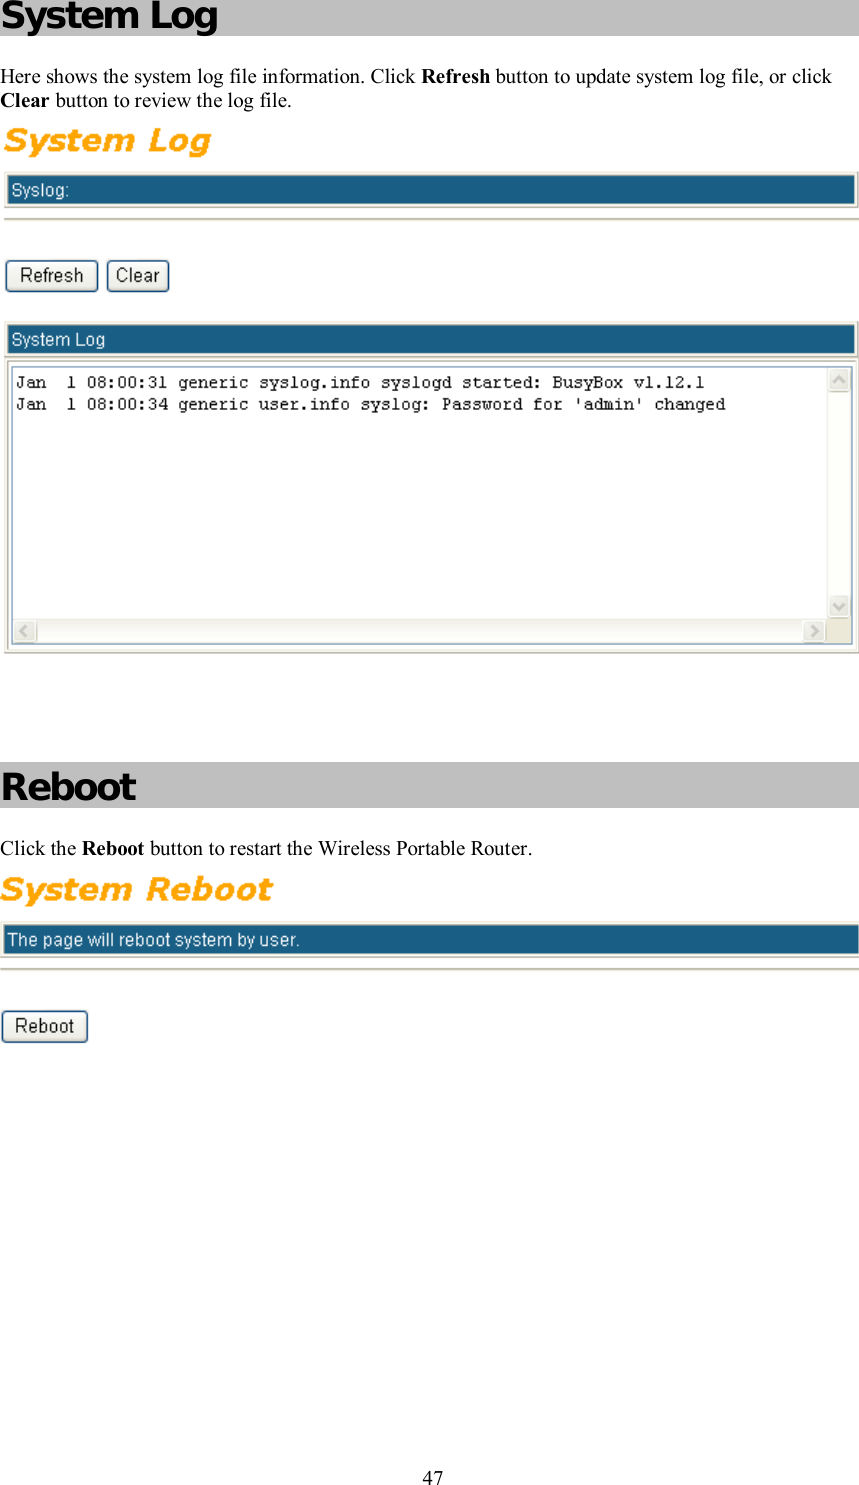    47 System Log Here shows the system log file information. Click Refresh button to update system log file, or click Clear button to review the log file.            Reboot Click the Reboot button to restart the Wireless Portable Router.   